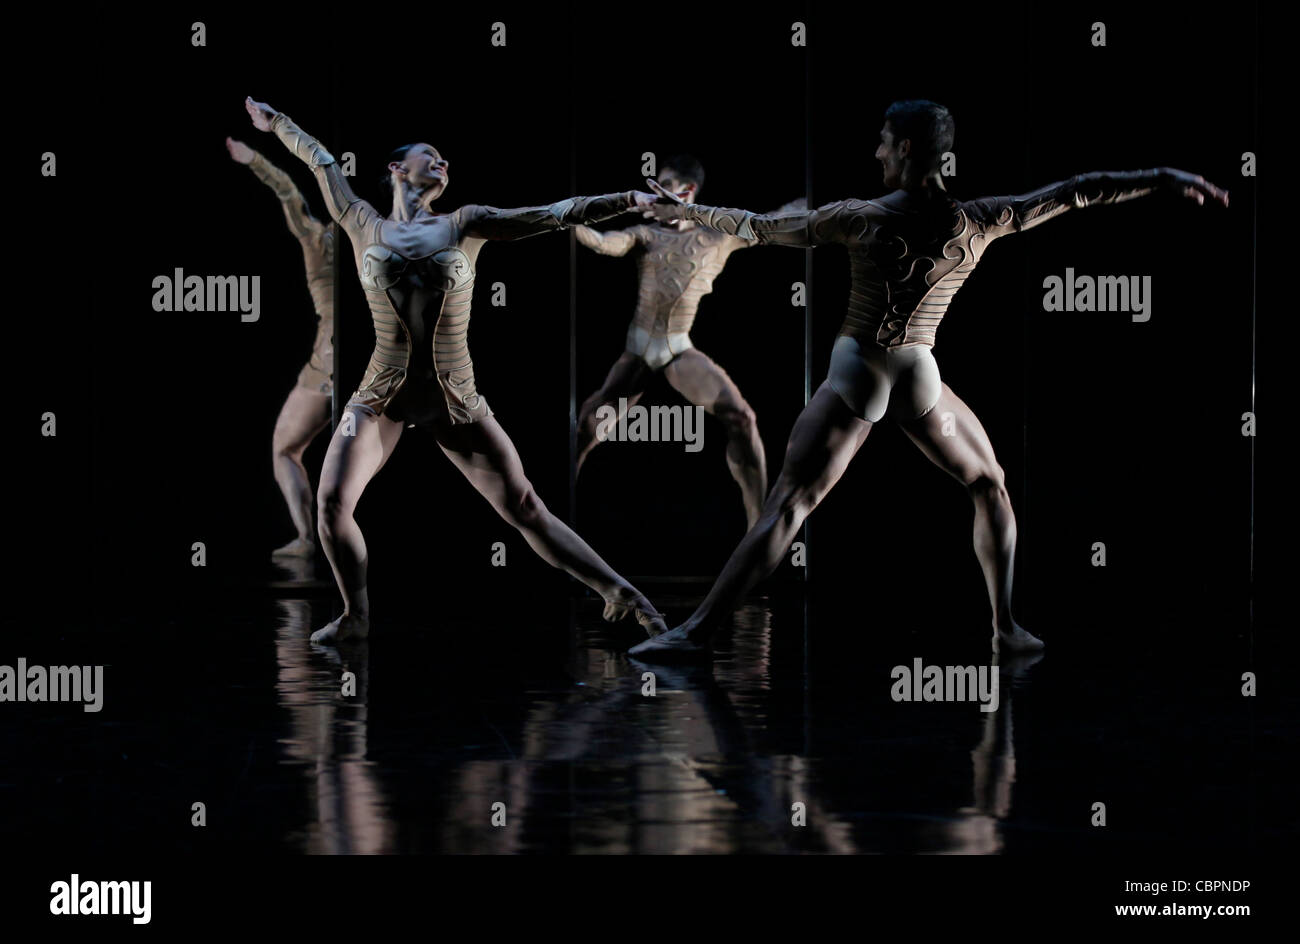 Magifique, Magifique - Choreography : Thierry MALANDIN - Music by Piotr Ilitch TCHAIKOVSKI - with the dancers of the Malandain Stock Photo